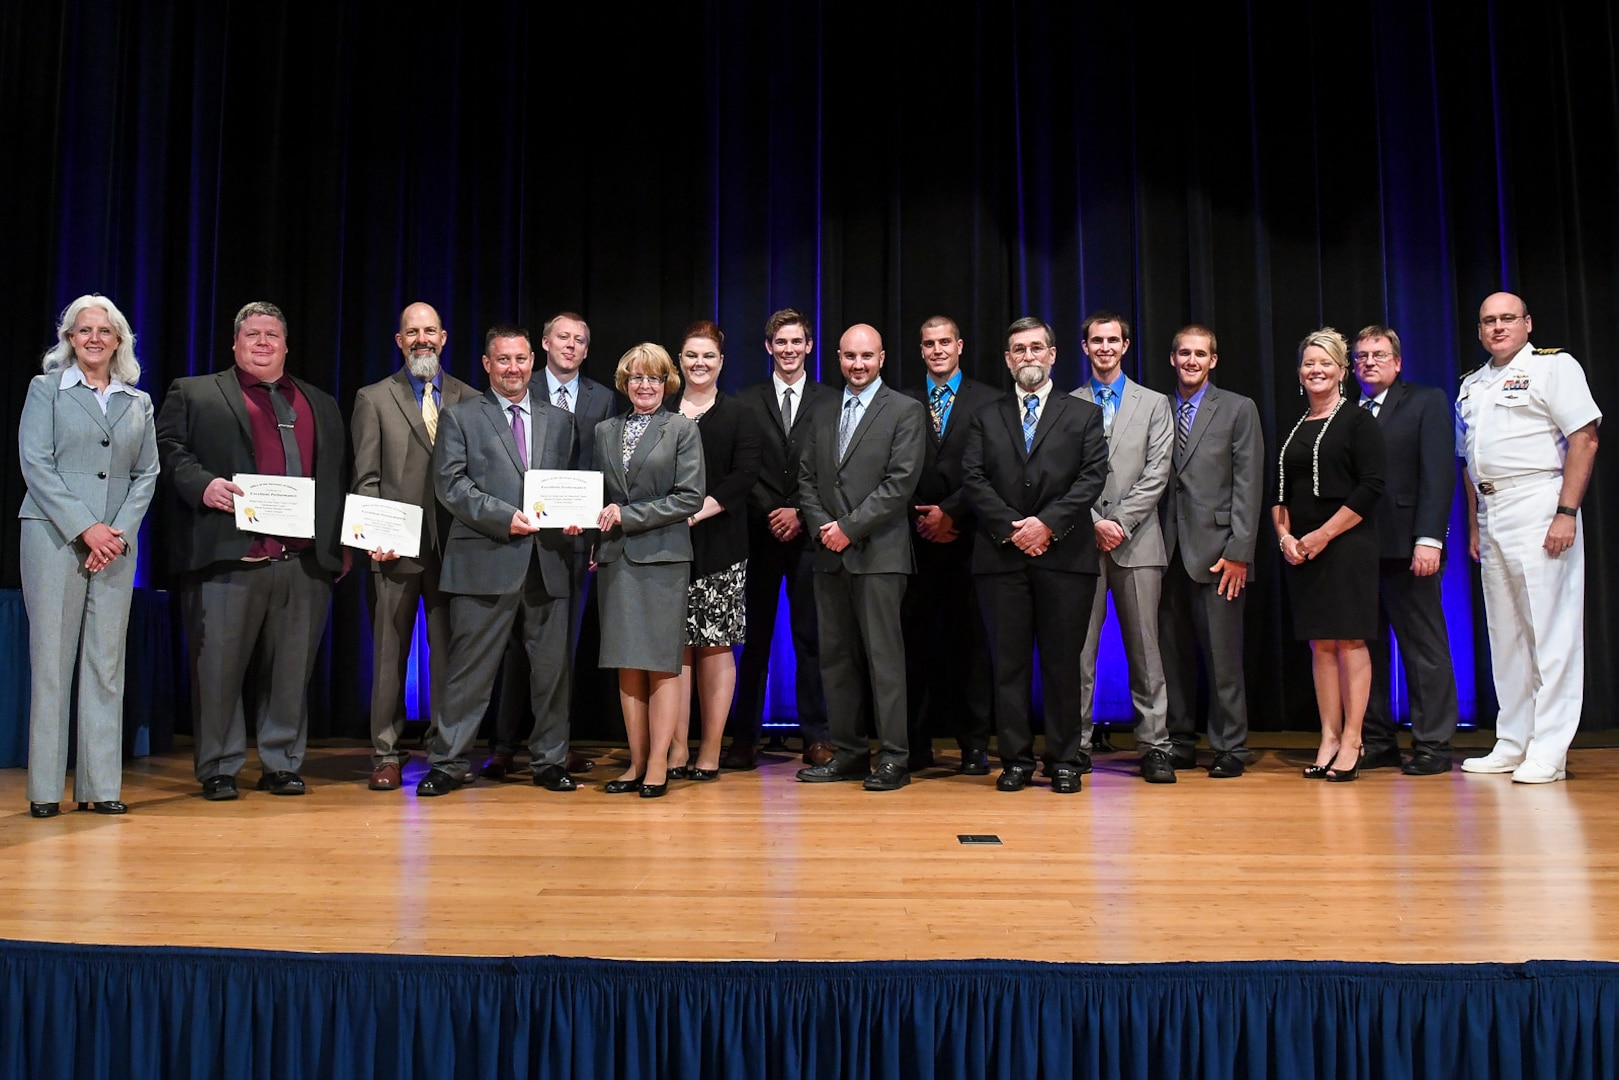 The U.S. Navy’s awardees at the Department of Defense’s Value Engineering Achievement Awards pose for a group photo during a ceremony held in the auditorium of the Pentagon in Arlington, Va., July 18, 2017. (U.S. Army Photo by Zane Ecklund)